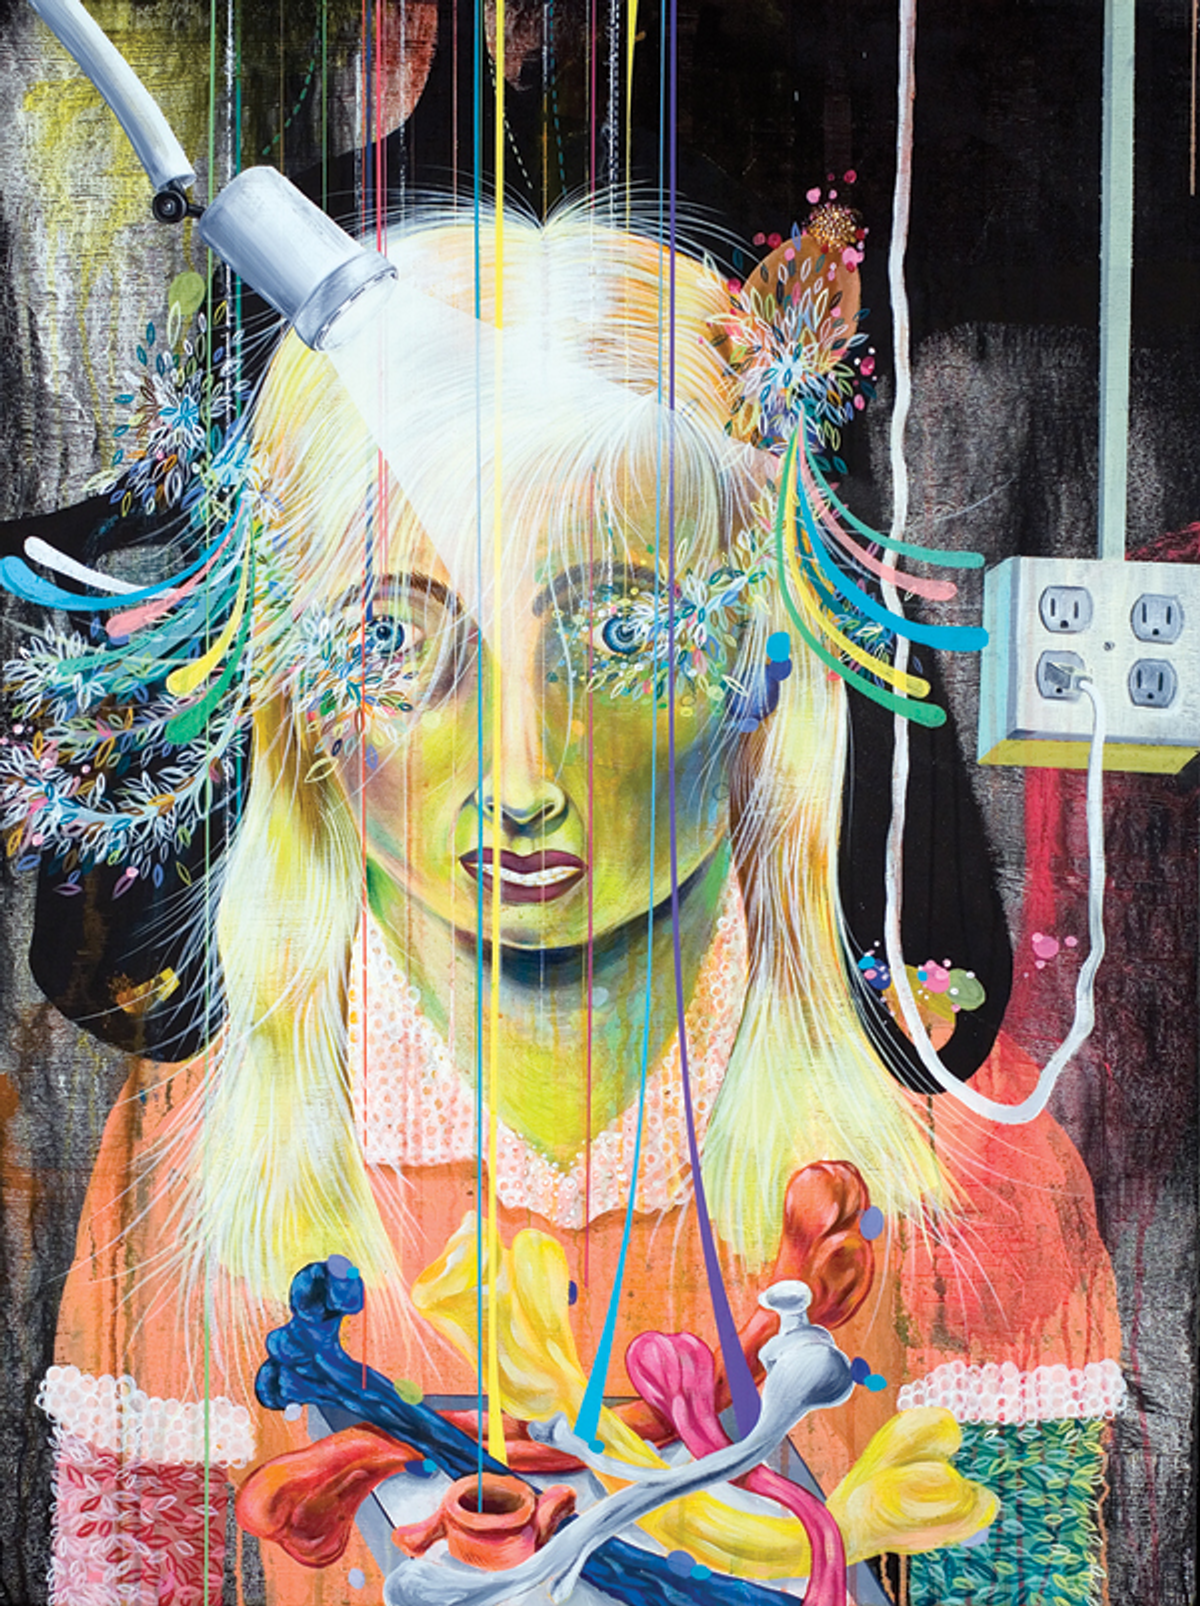 "Patient-Girl," from the series "Patient," 2007. Mixed media on canvas, 40 x 30 inches.